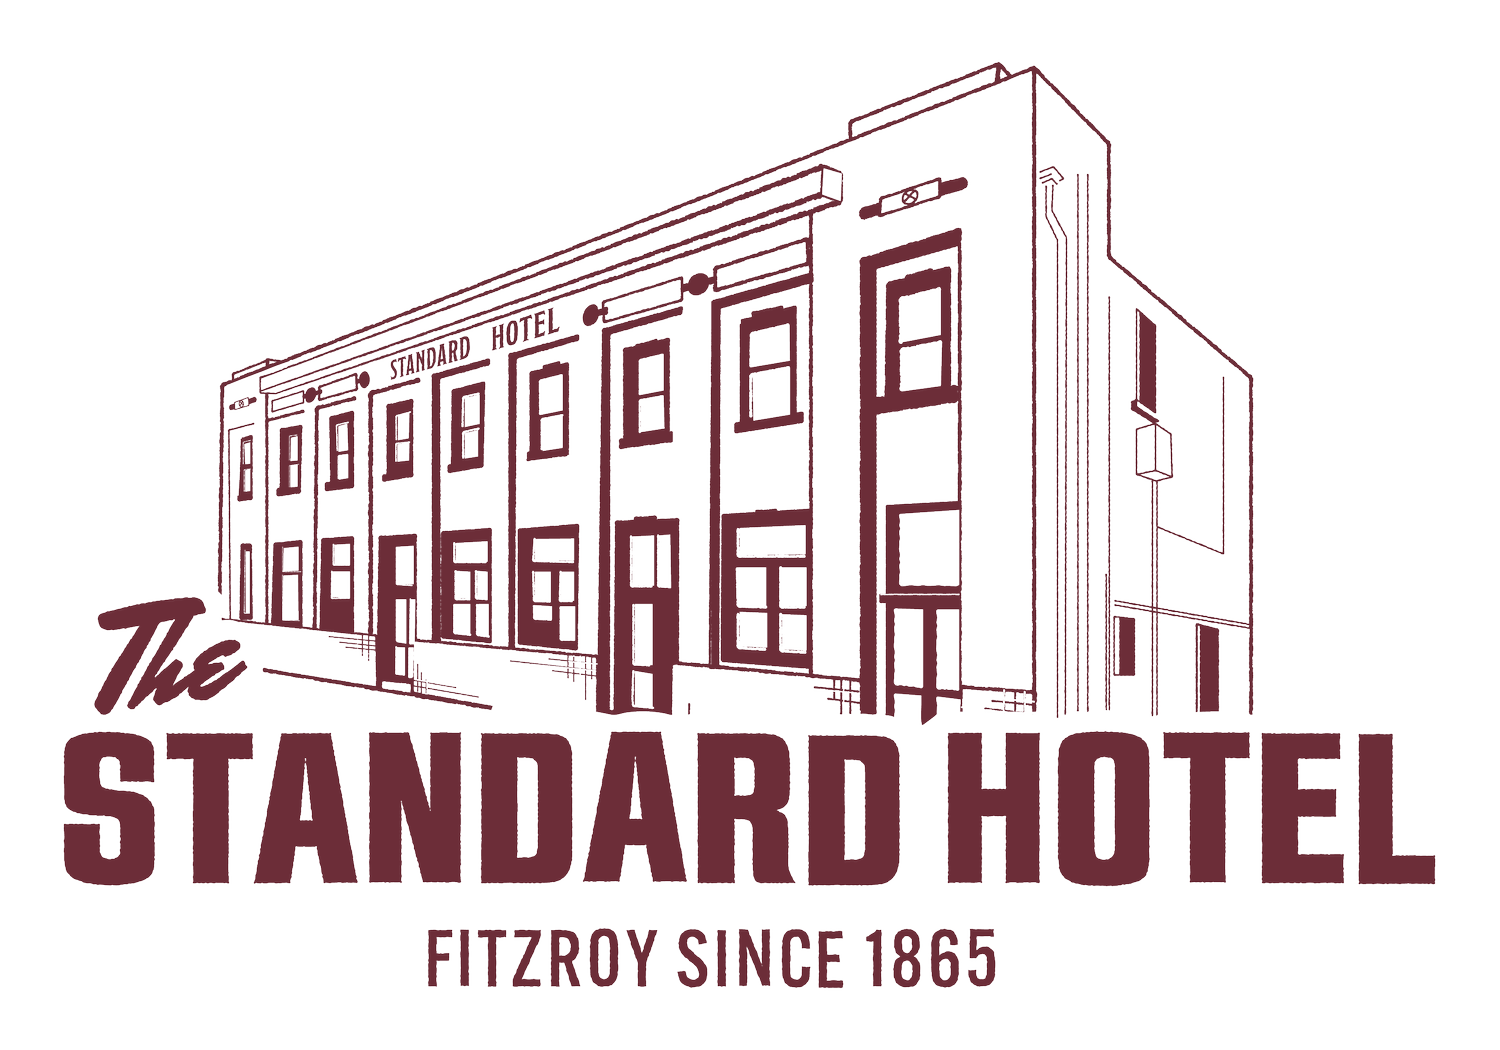 The Standard Hotel